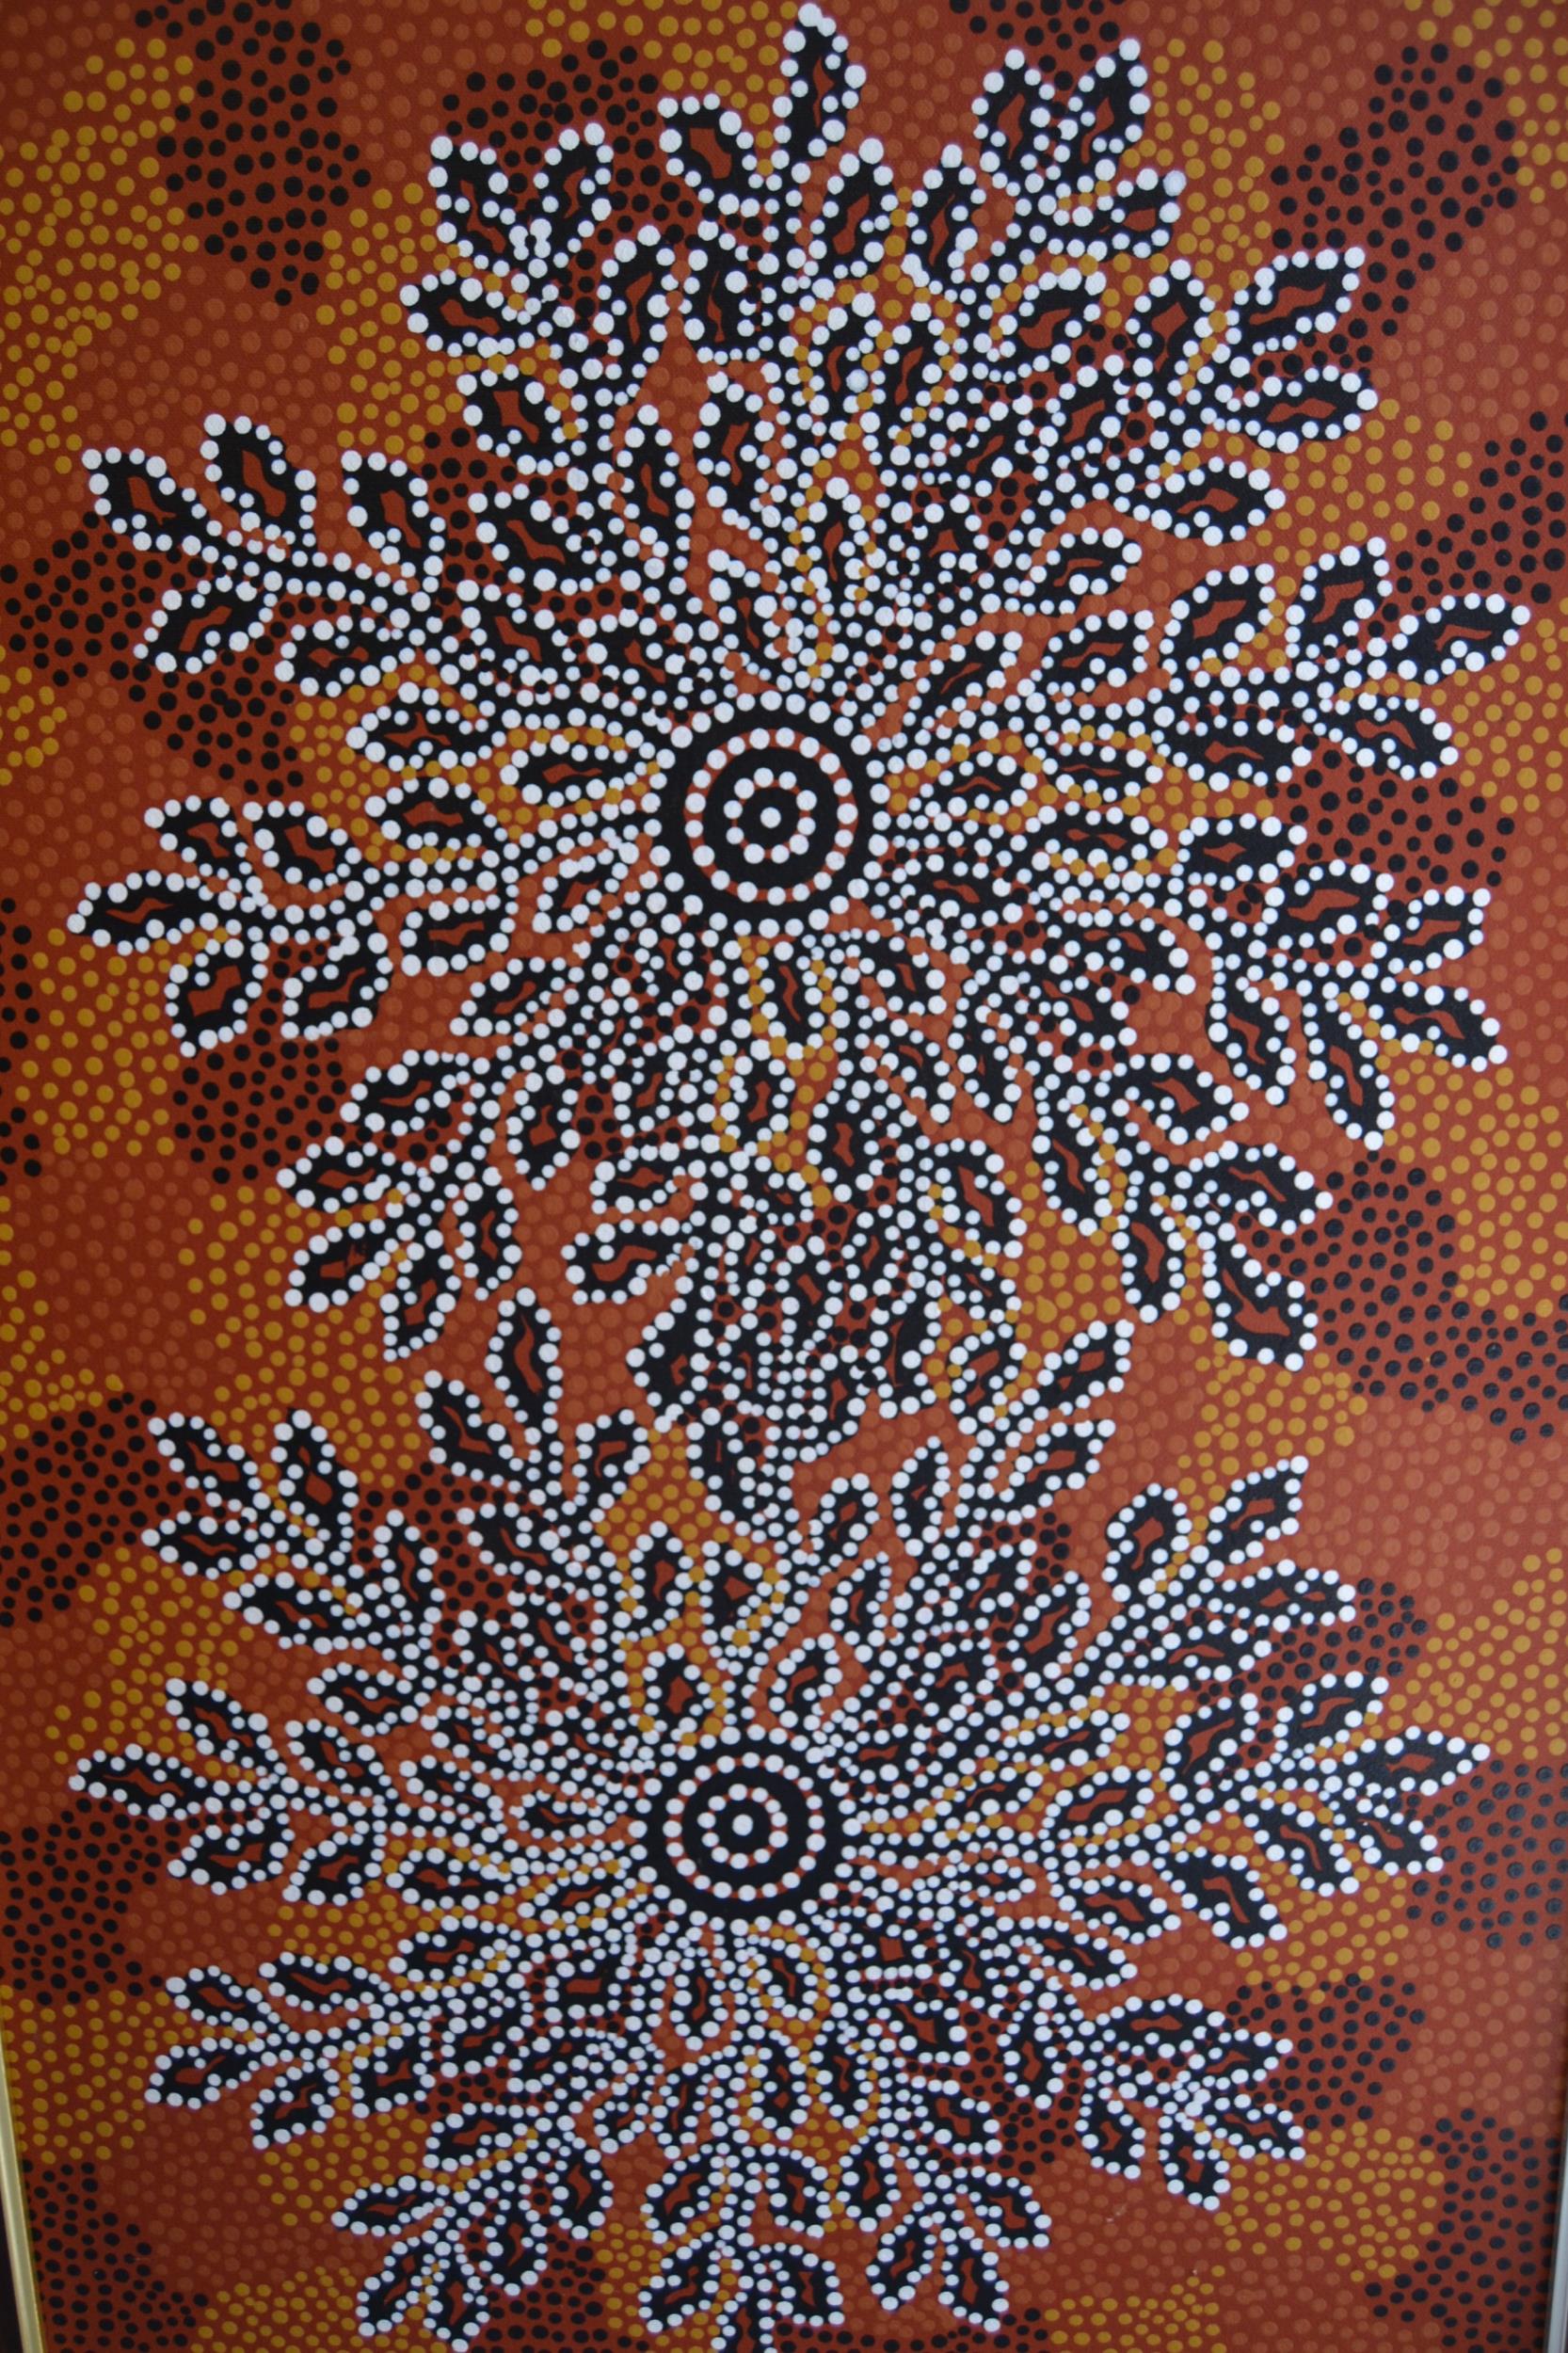 20th Century Aboriginal oil painting on canvas, inscribed verso ' Bush Patato Dreaming May-Gala